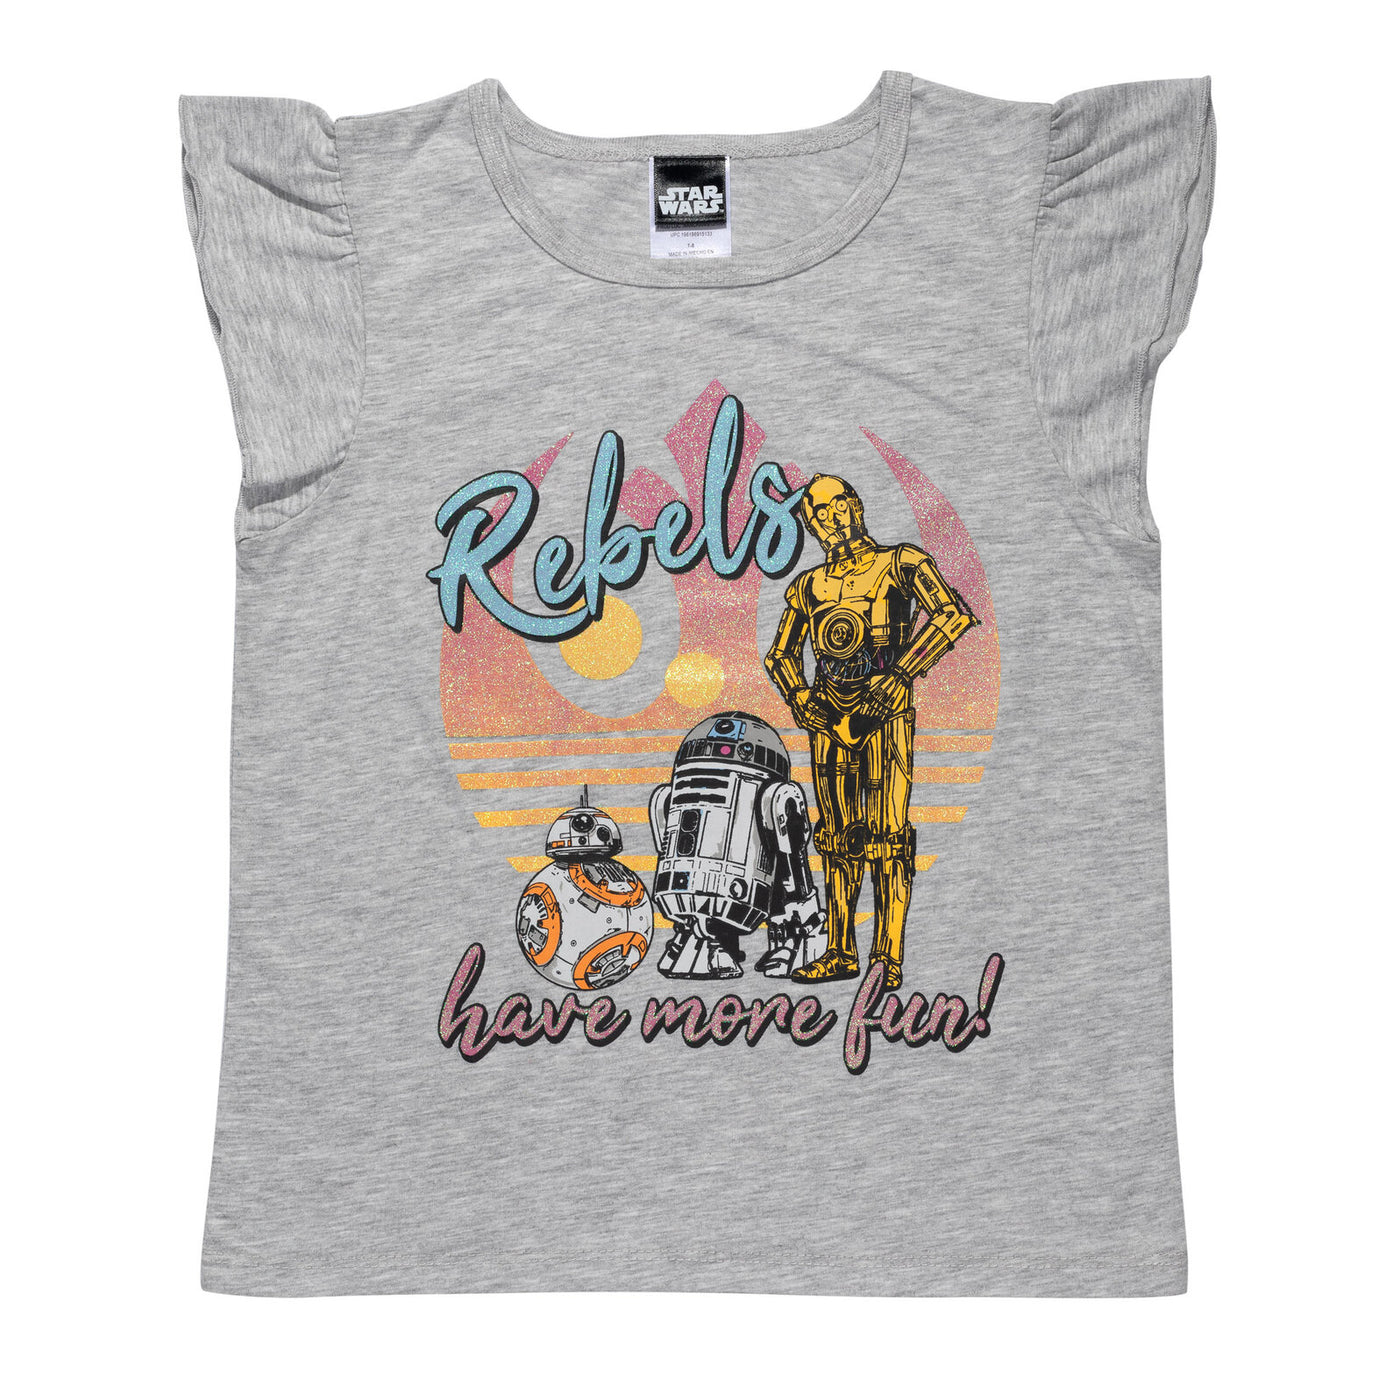 Star Wars 3 Pack Graphic T-Shirts